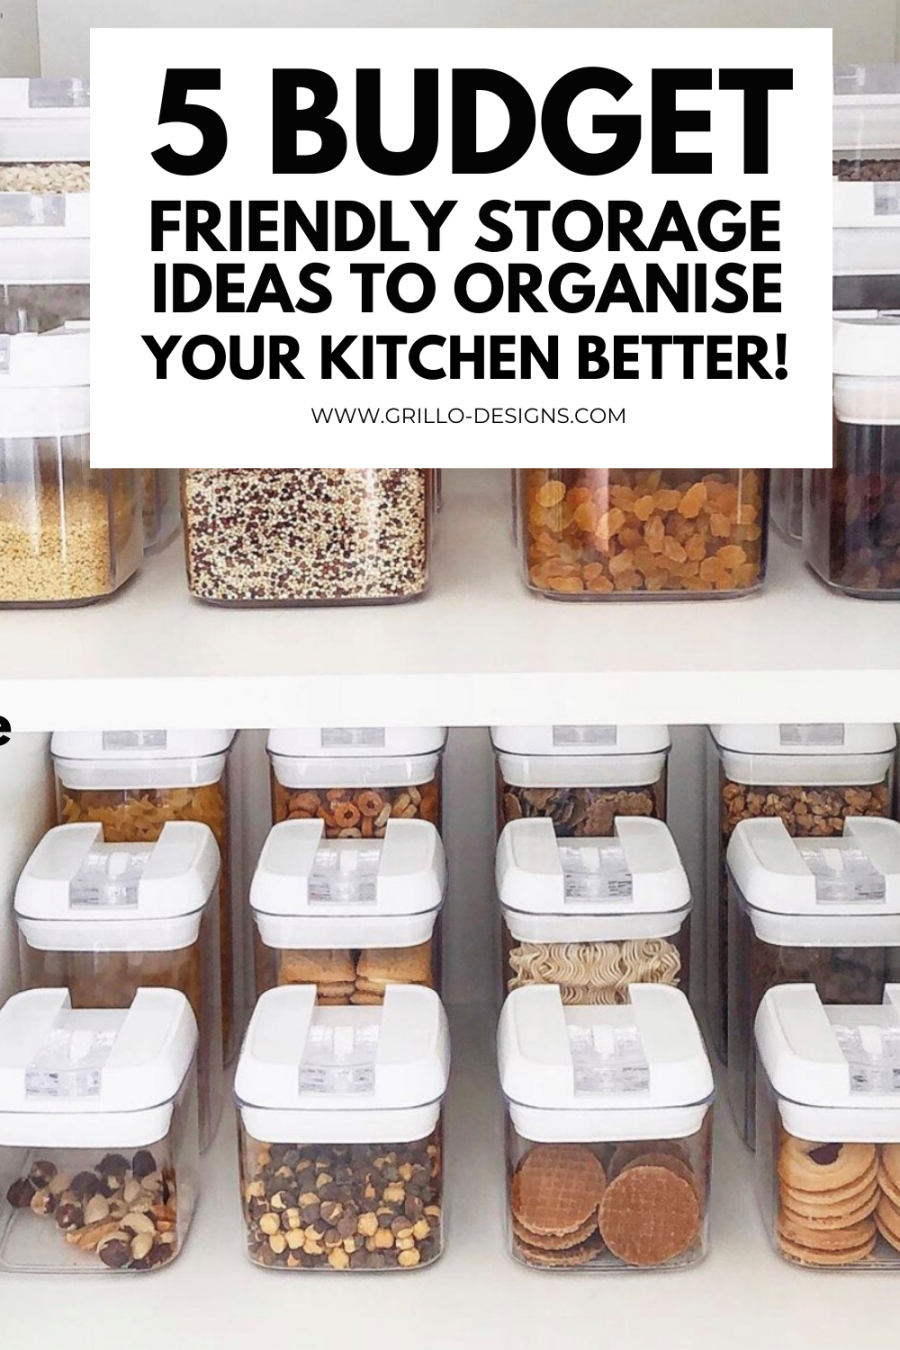 BUDGET FRIENDLY STORAGE IDEAS FOR A PERFECTLY ORGANISED KITCHEN